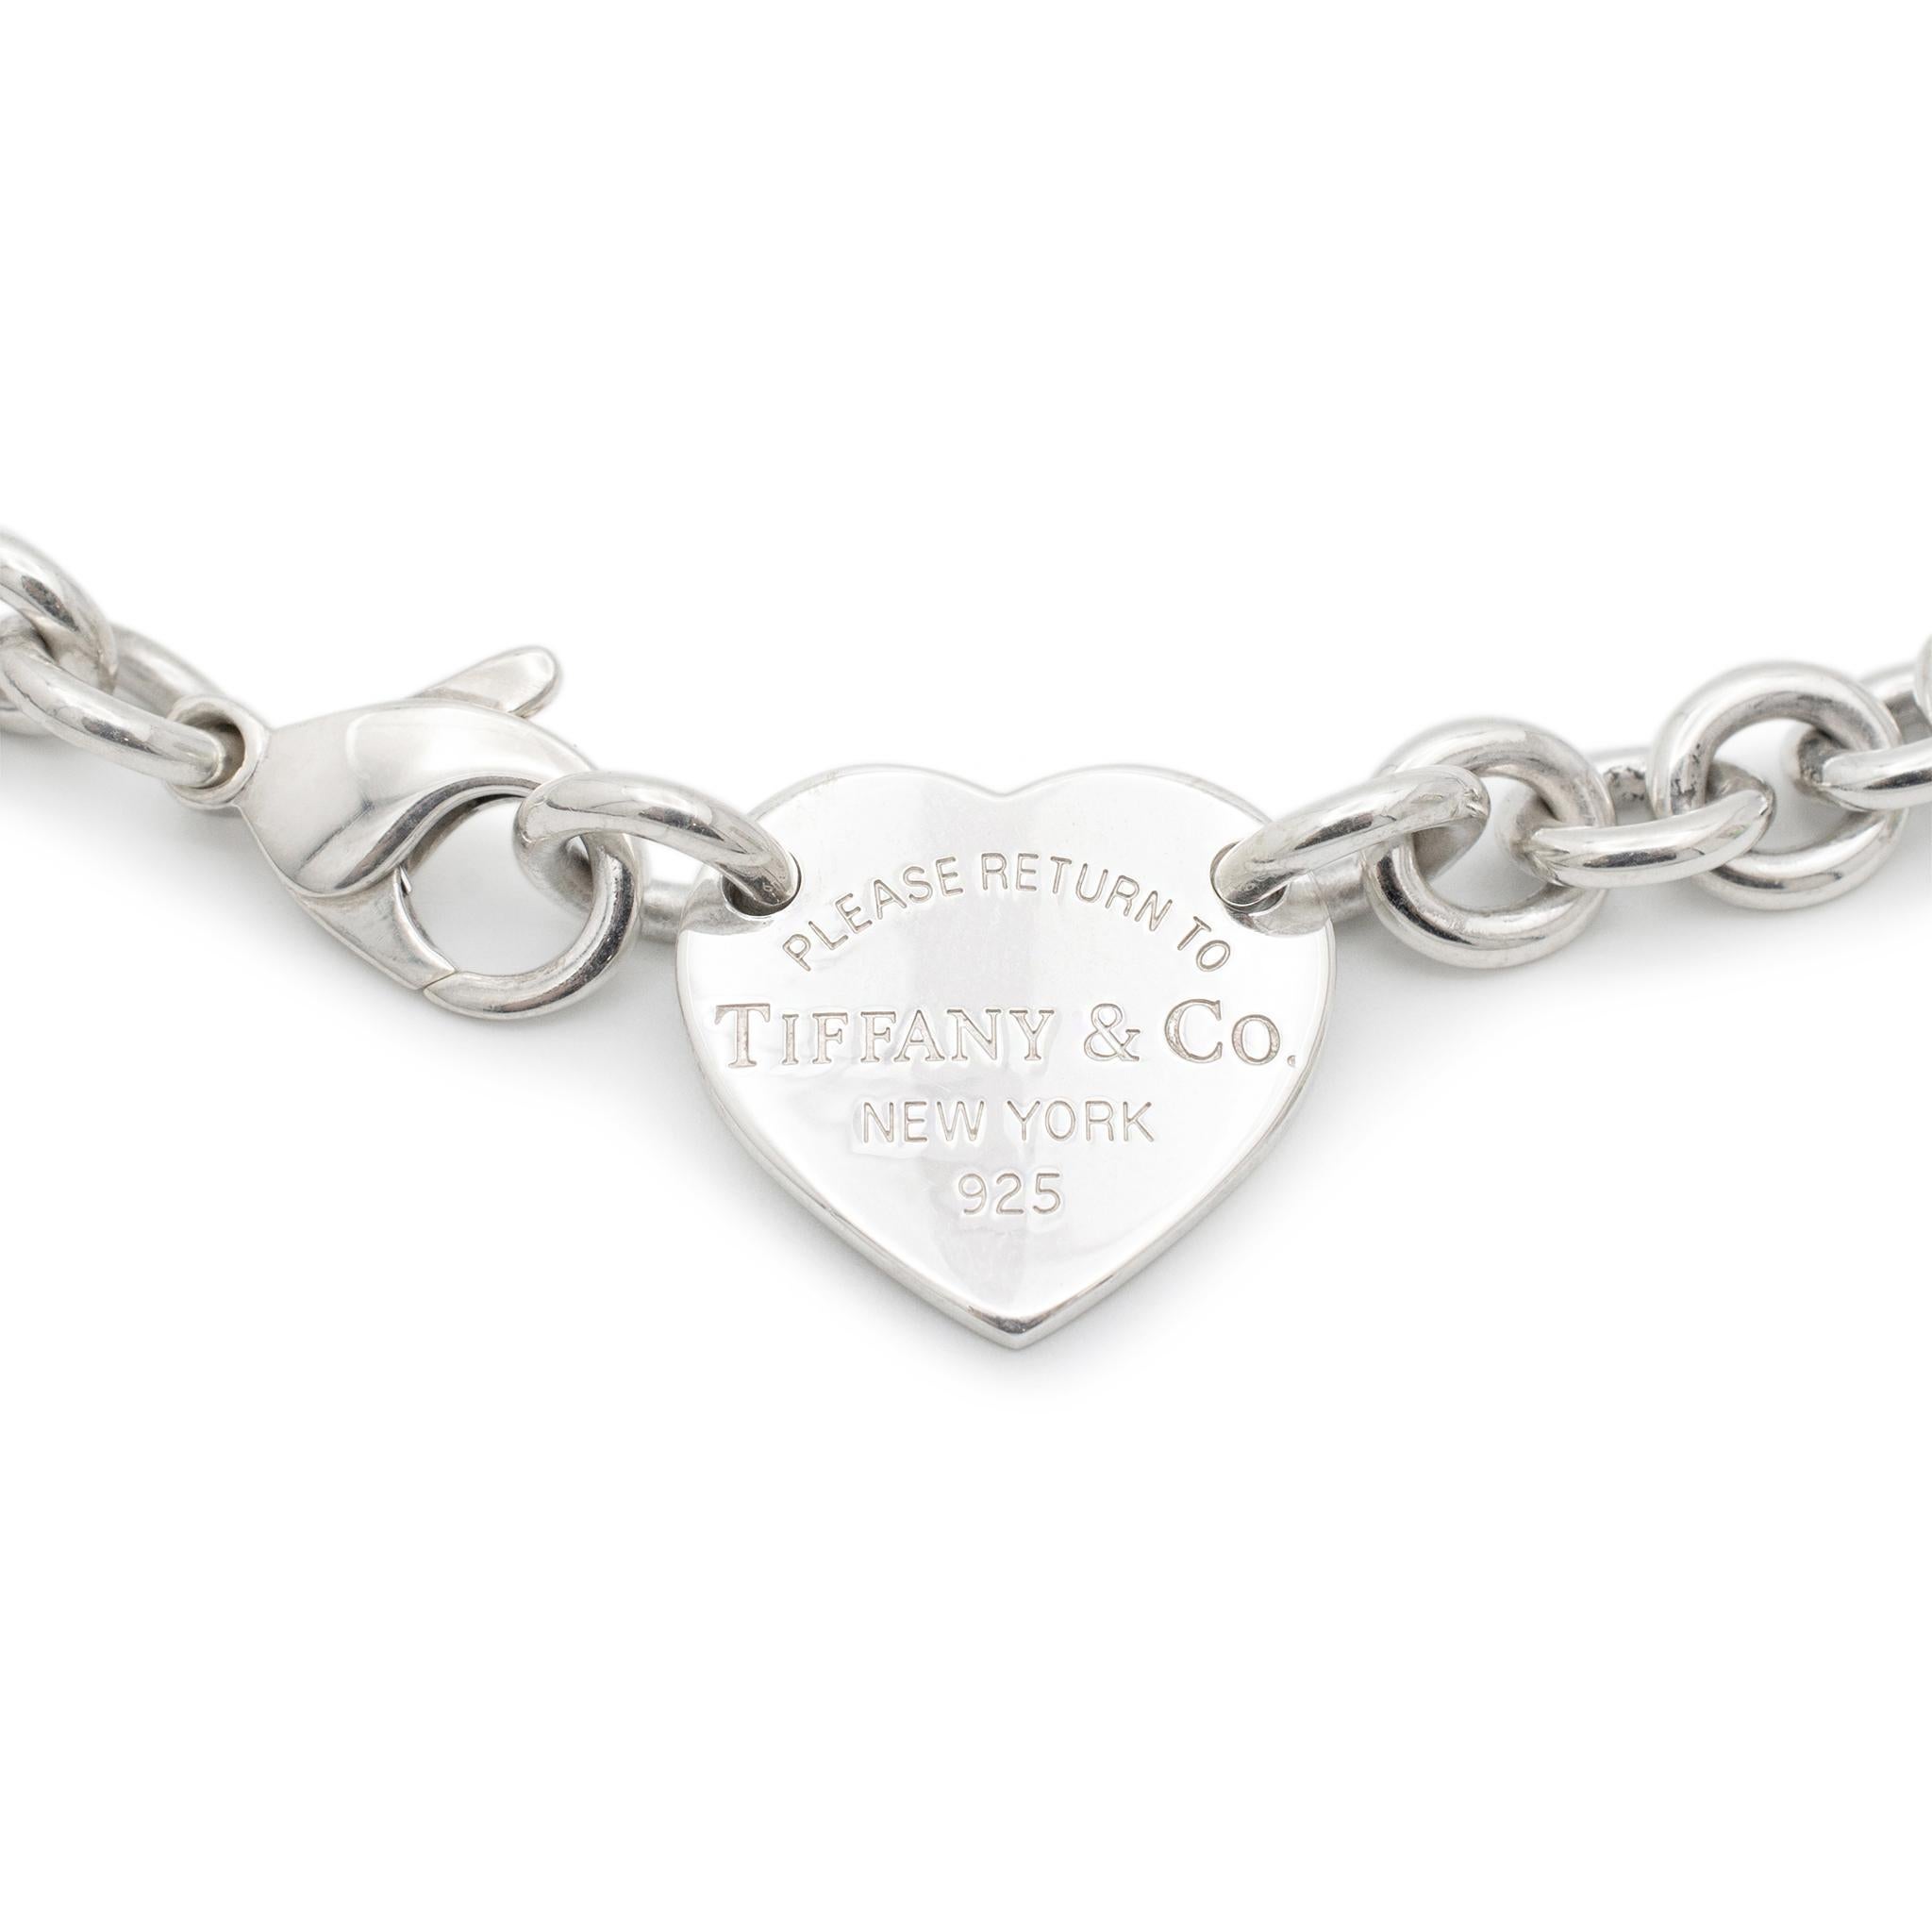 Tiffany & Co. Ladies 925 Sterling Silver Heart Tag Tiffany Pendant Necklace In Excellent Condition For Sale In Houston, TX